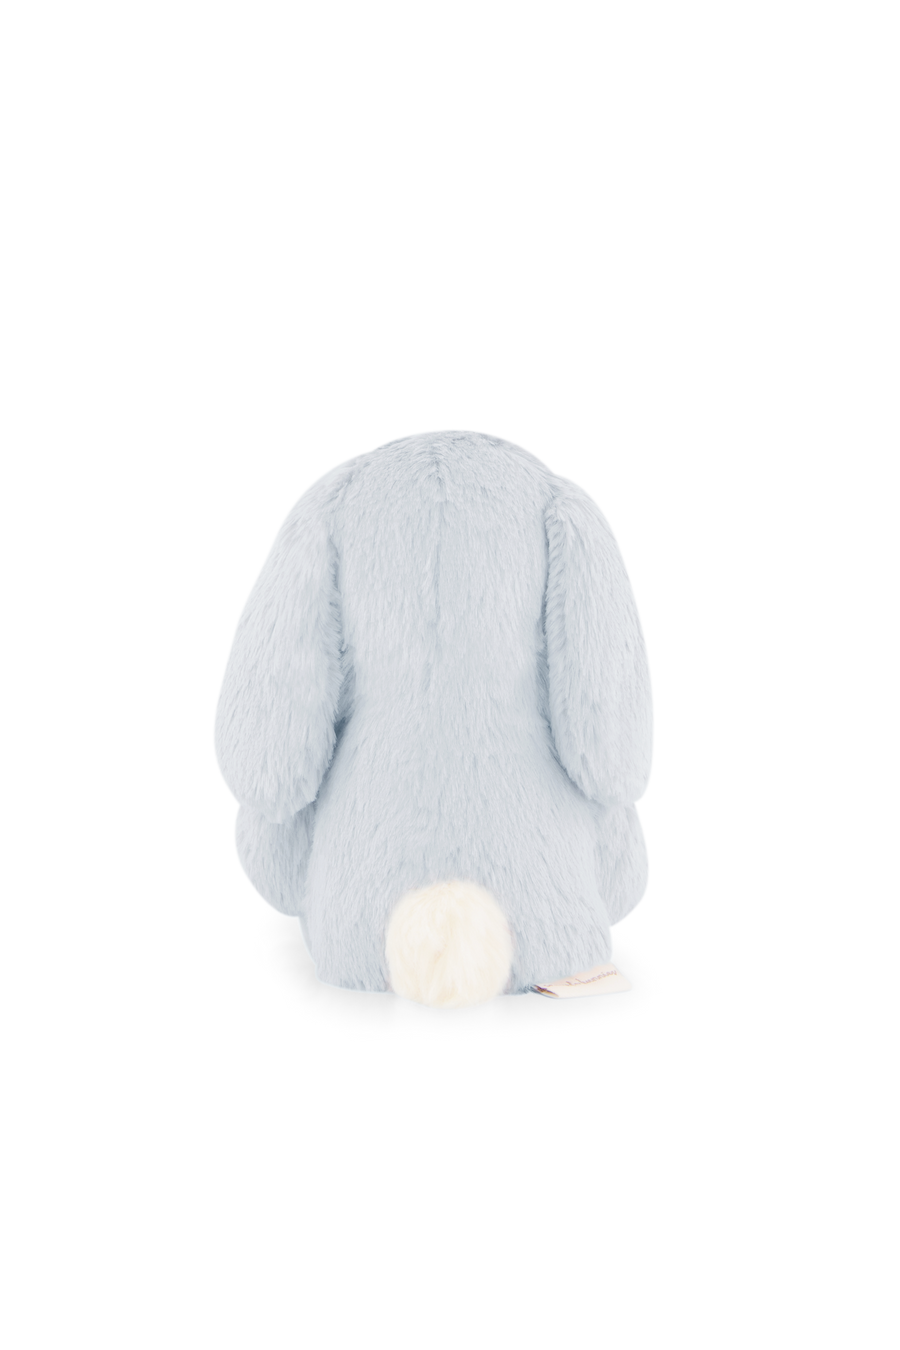 Snuggle Bunnies - Penelope the Bunny - Droplet Childrens Toy from Jamie Kay USA